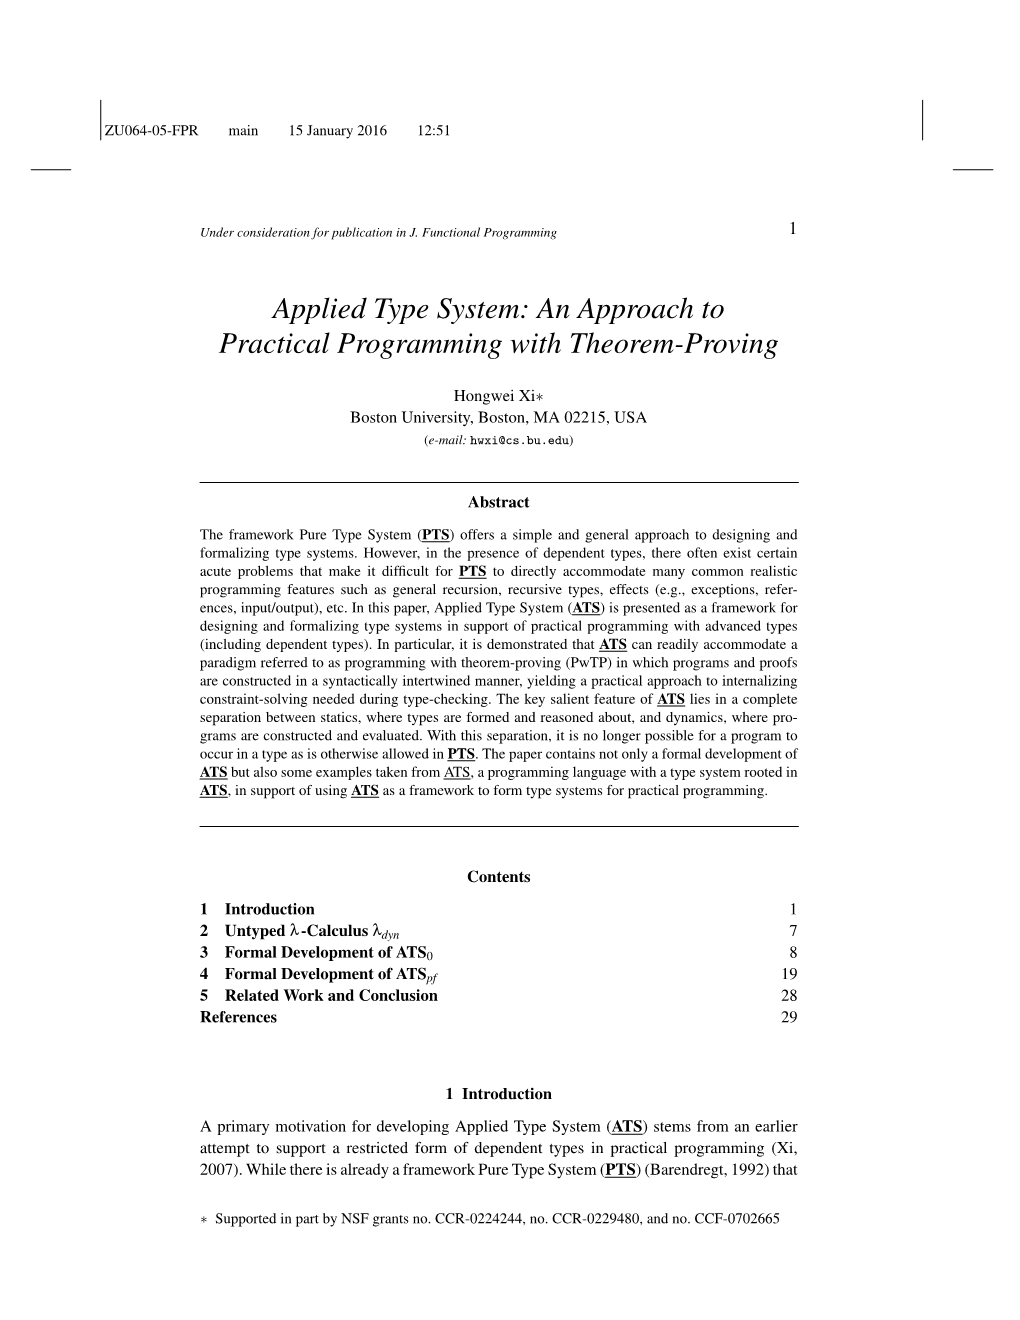 Applied Type System: an Approach to Practical Programming with Theorem-Proving